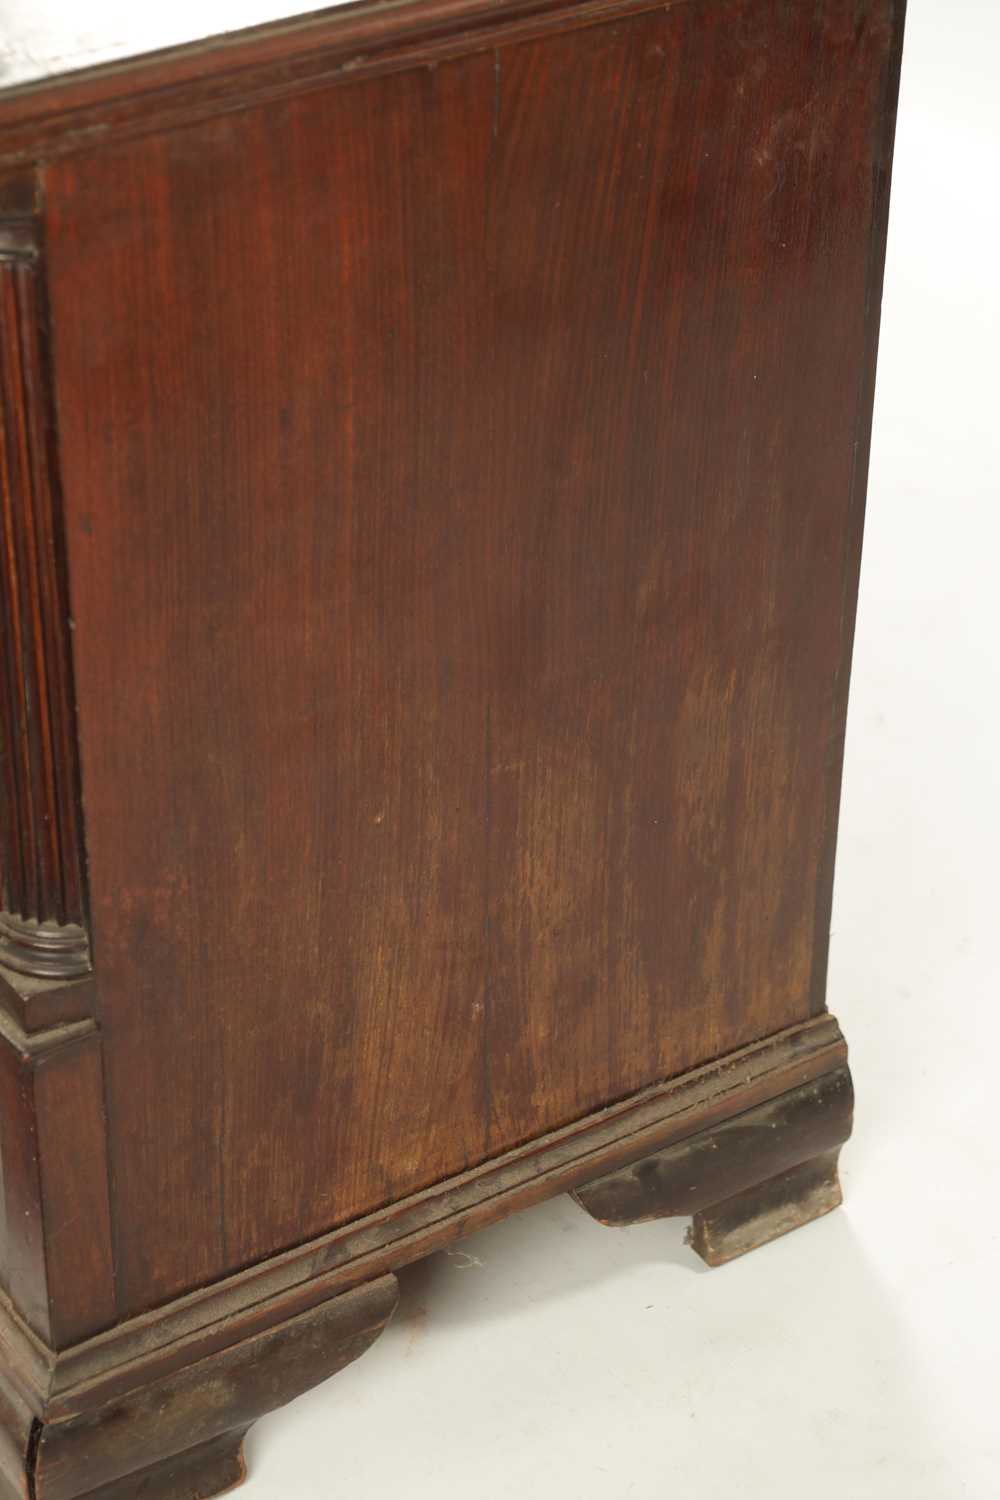 AN 18TH CENTURY FIGURED MAHOGANY CHEST OF DRAWERS - Image 5 of 6